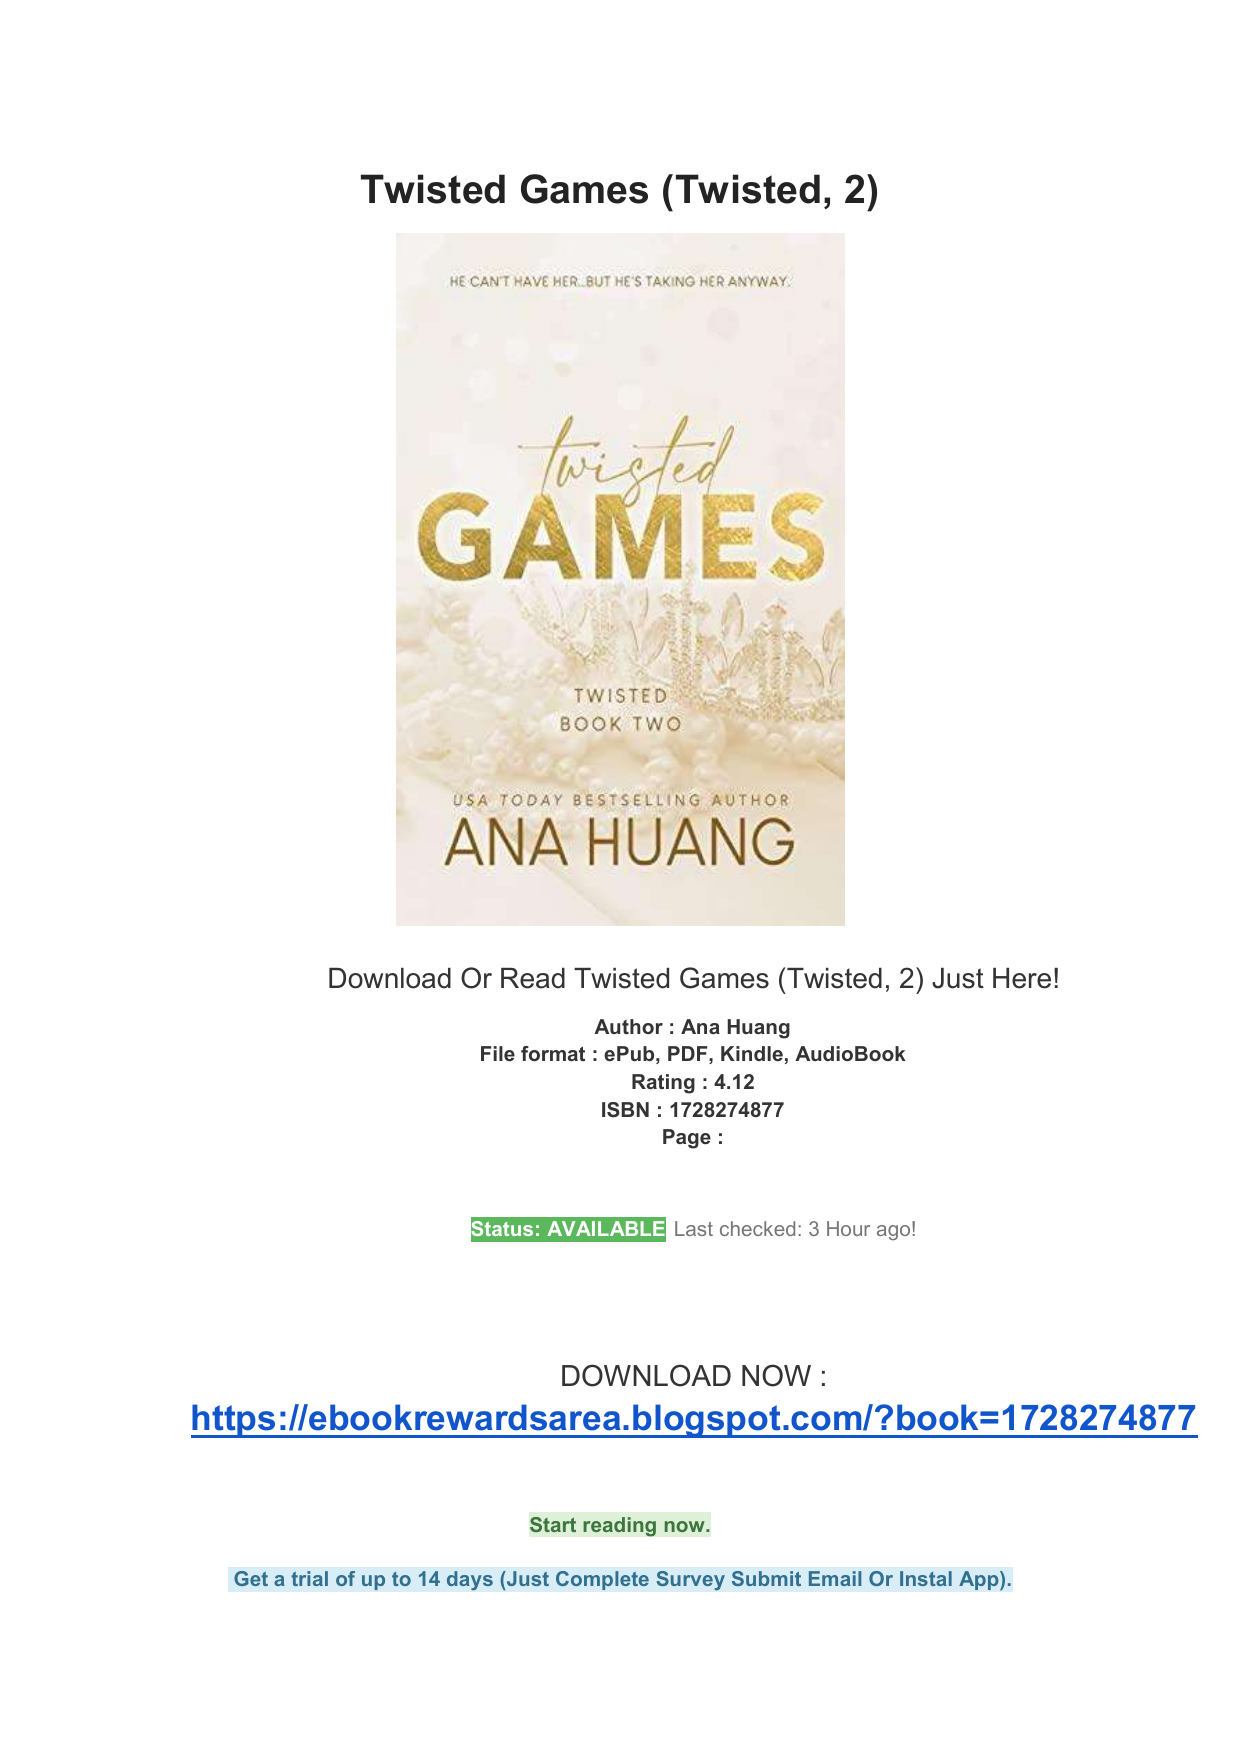 DOWNLOAD) PDF Twisted Games (Twisted, 2) by Ana Huang